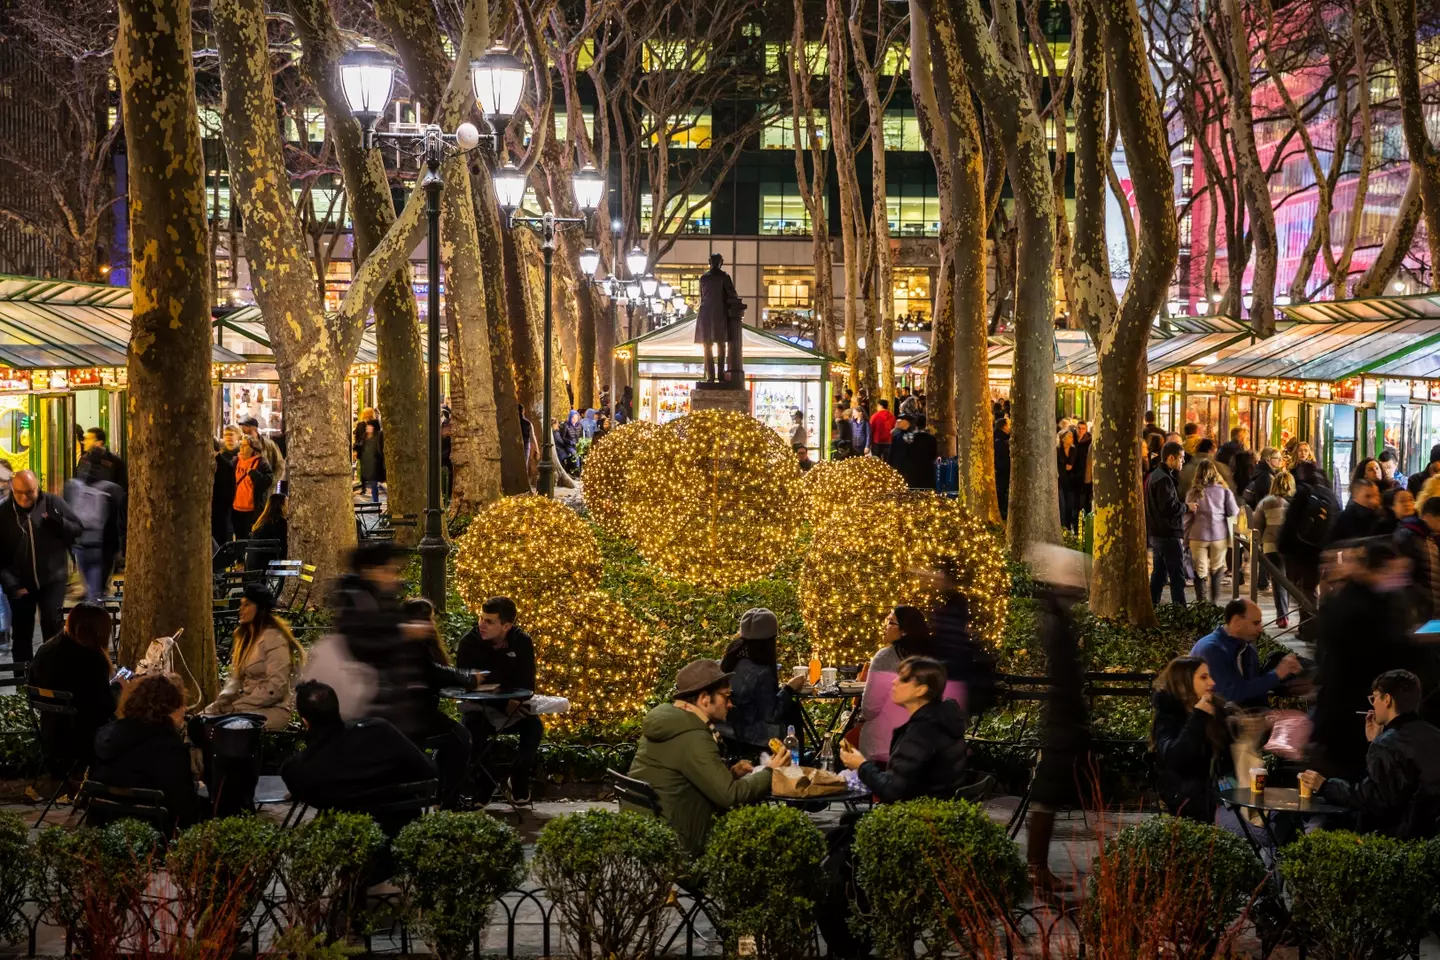 Bryant Park Winter Village in New York was revealed as the best Christmas market in the world.